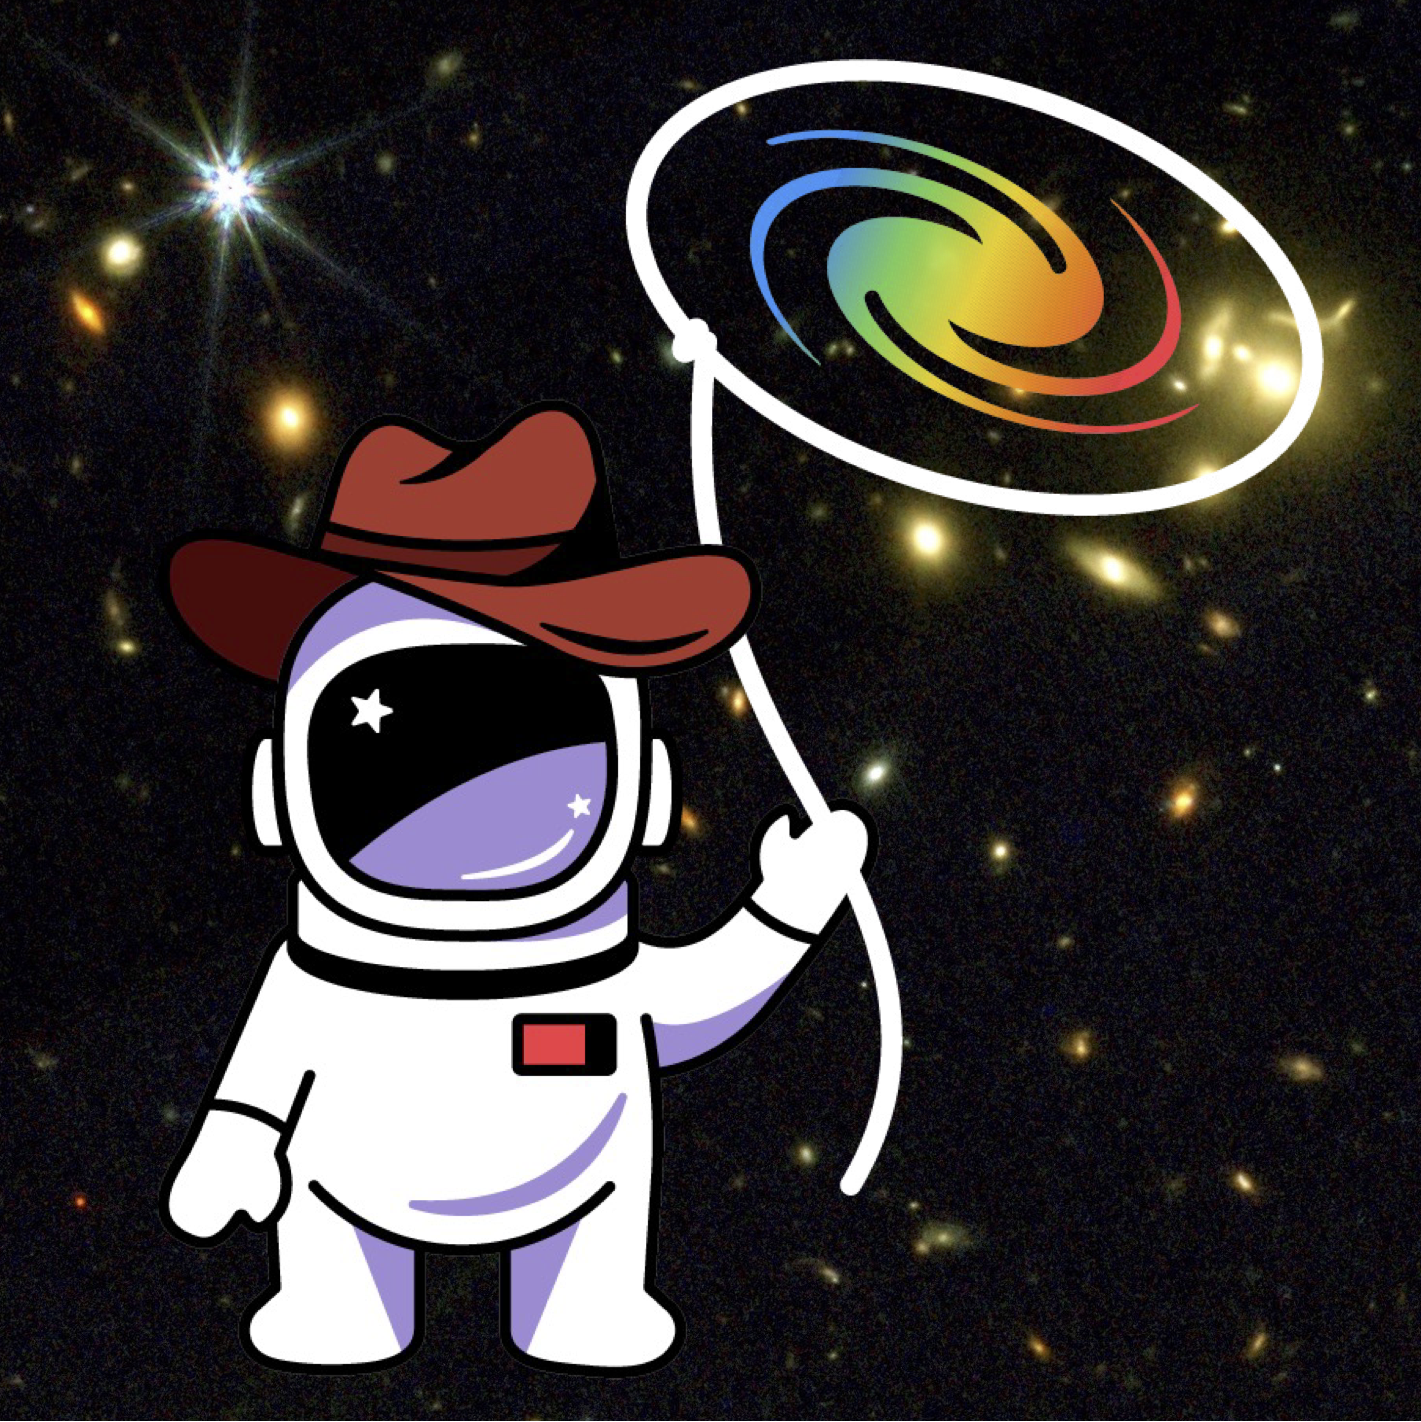 Floating in the black of deep space we see a jaunty astronaut in a white suit. He is sporting a red cowboy hat. In his extended hand is a lasso, the looped end of which has encircled a rainbow colored spiral galaxy.